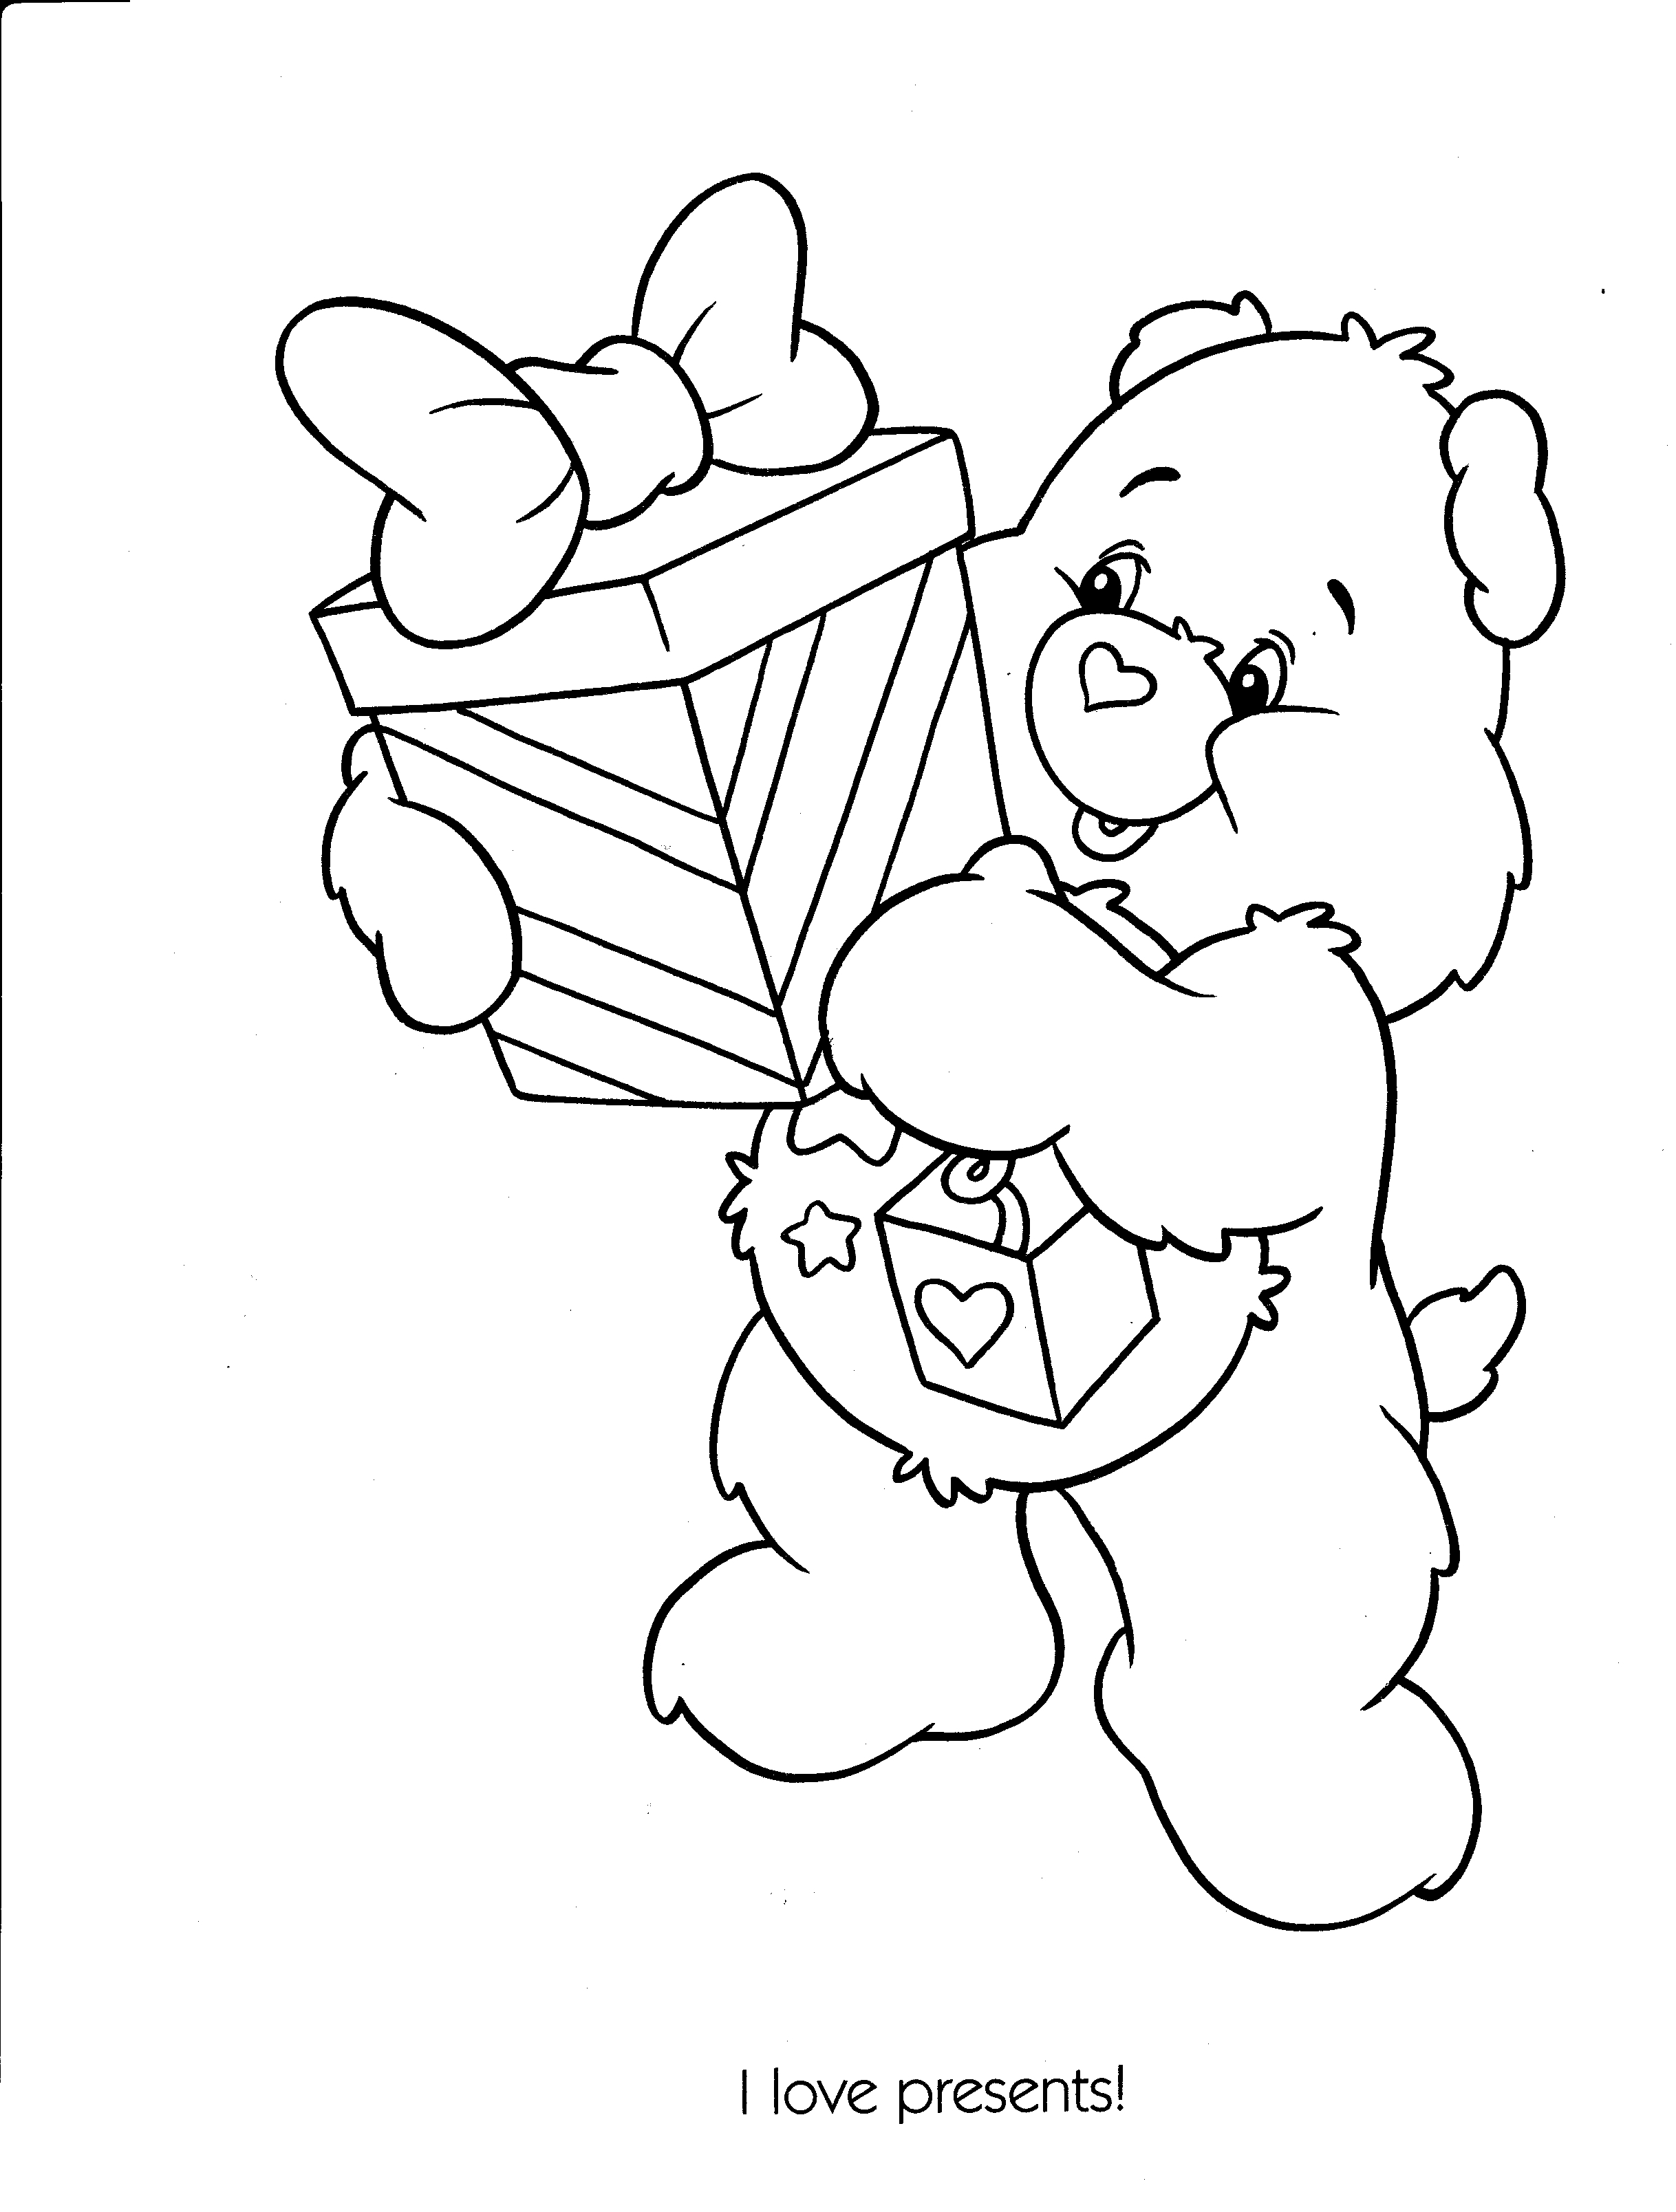 Free Care Bear Coloring Pages Care Bears Coloring Pages Free Printable Coloring Pages